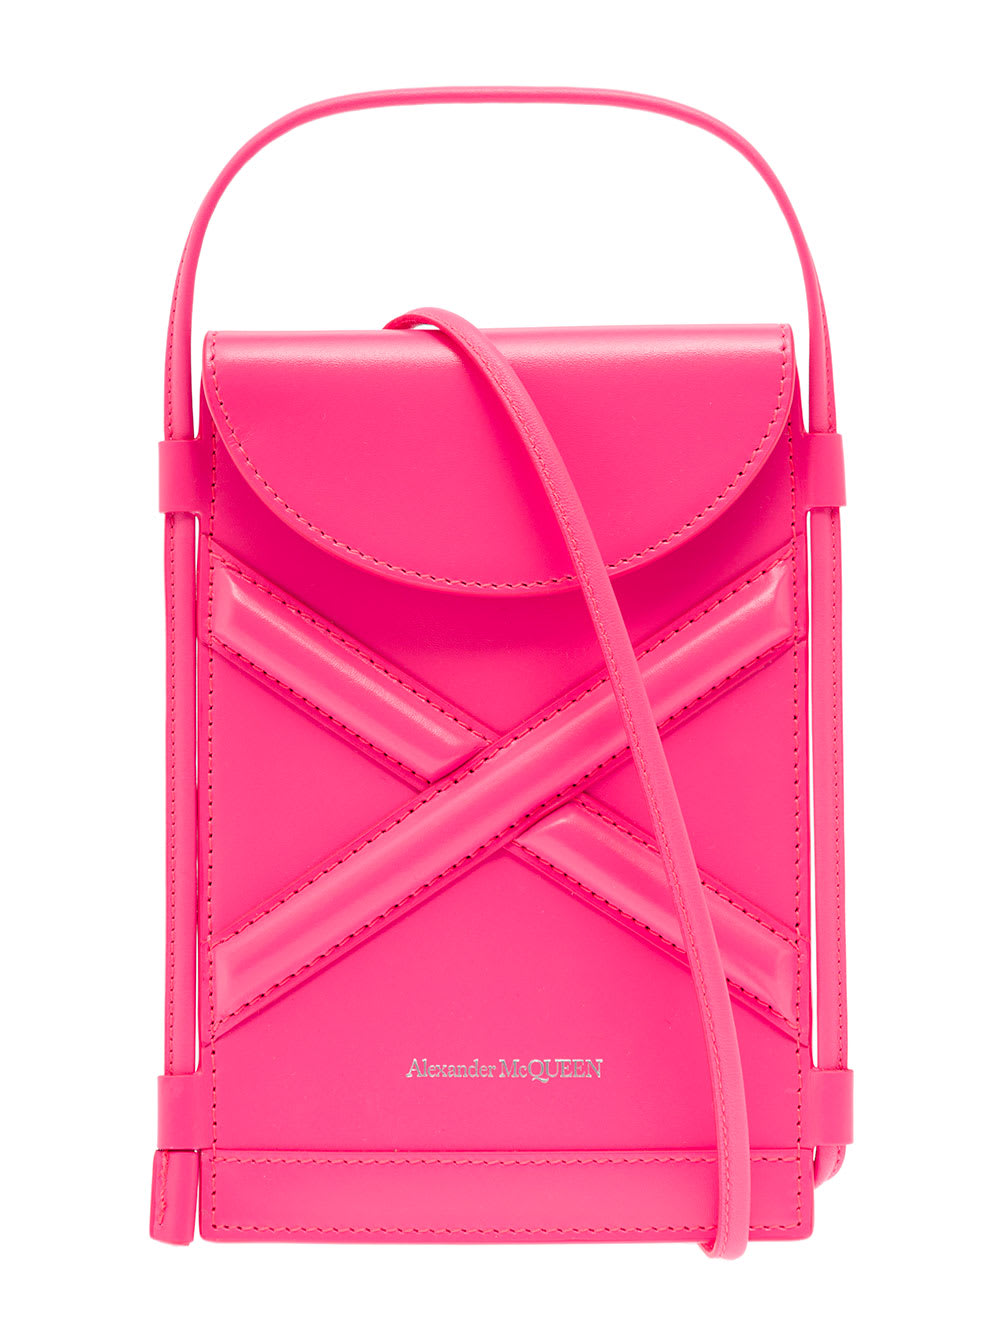 Alexander Mcqueen Womans The Curve Micro Pink Leather Crossbody Bag